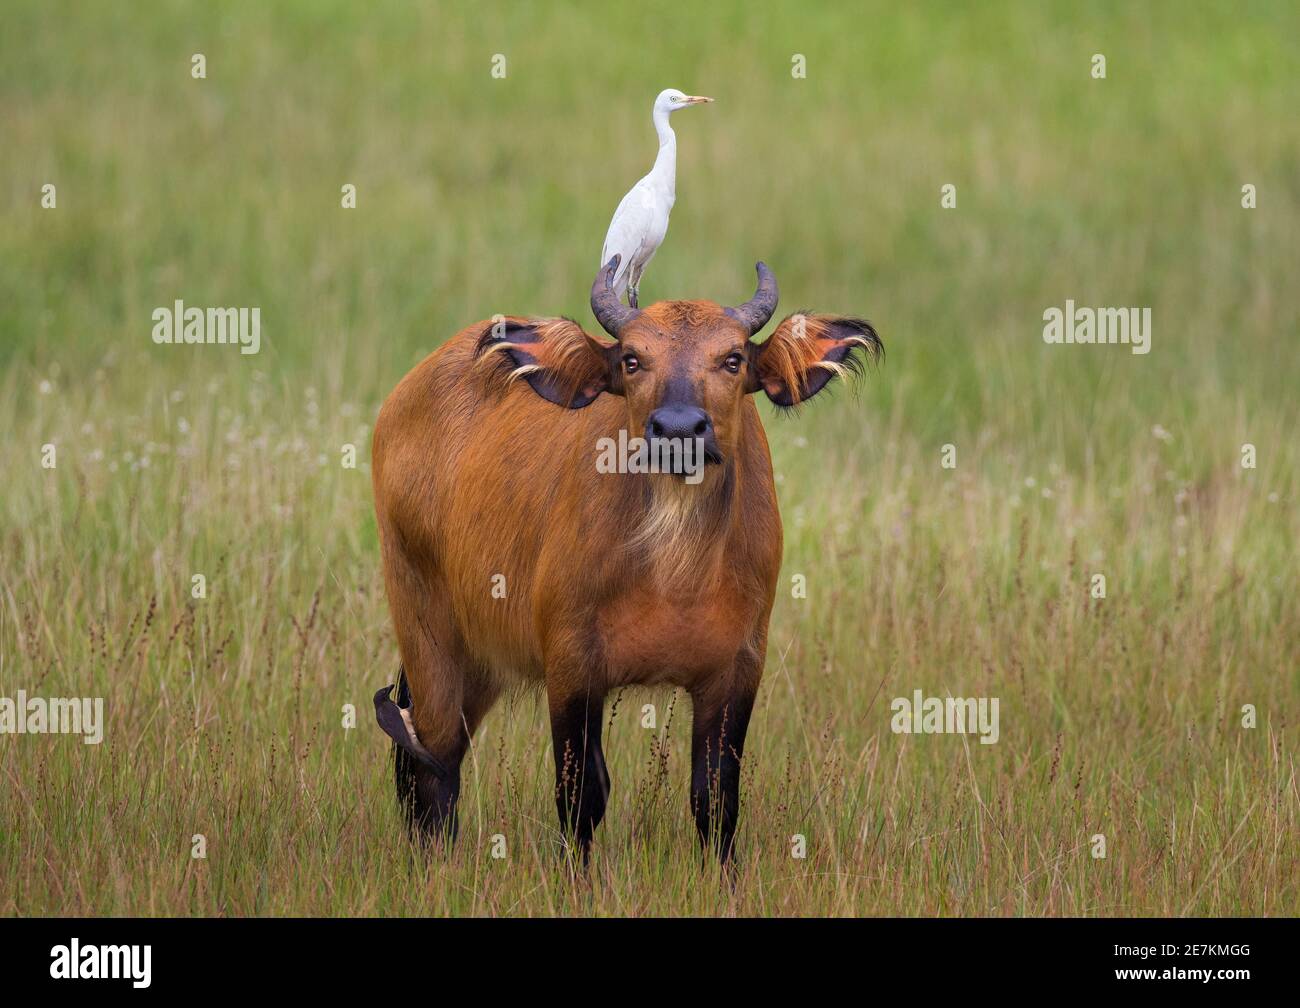 African Forest or Dwarf Buffalo (Syncerus caffer nanus) with Cattle Egret (Bubulcus ibis) on back, Loango National Park, Gabon, central Africa. Stock Photo